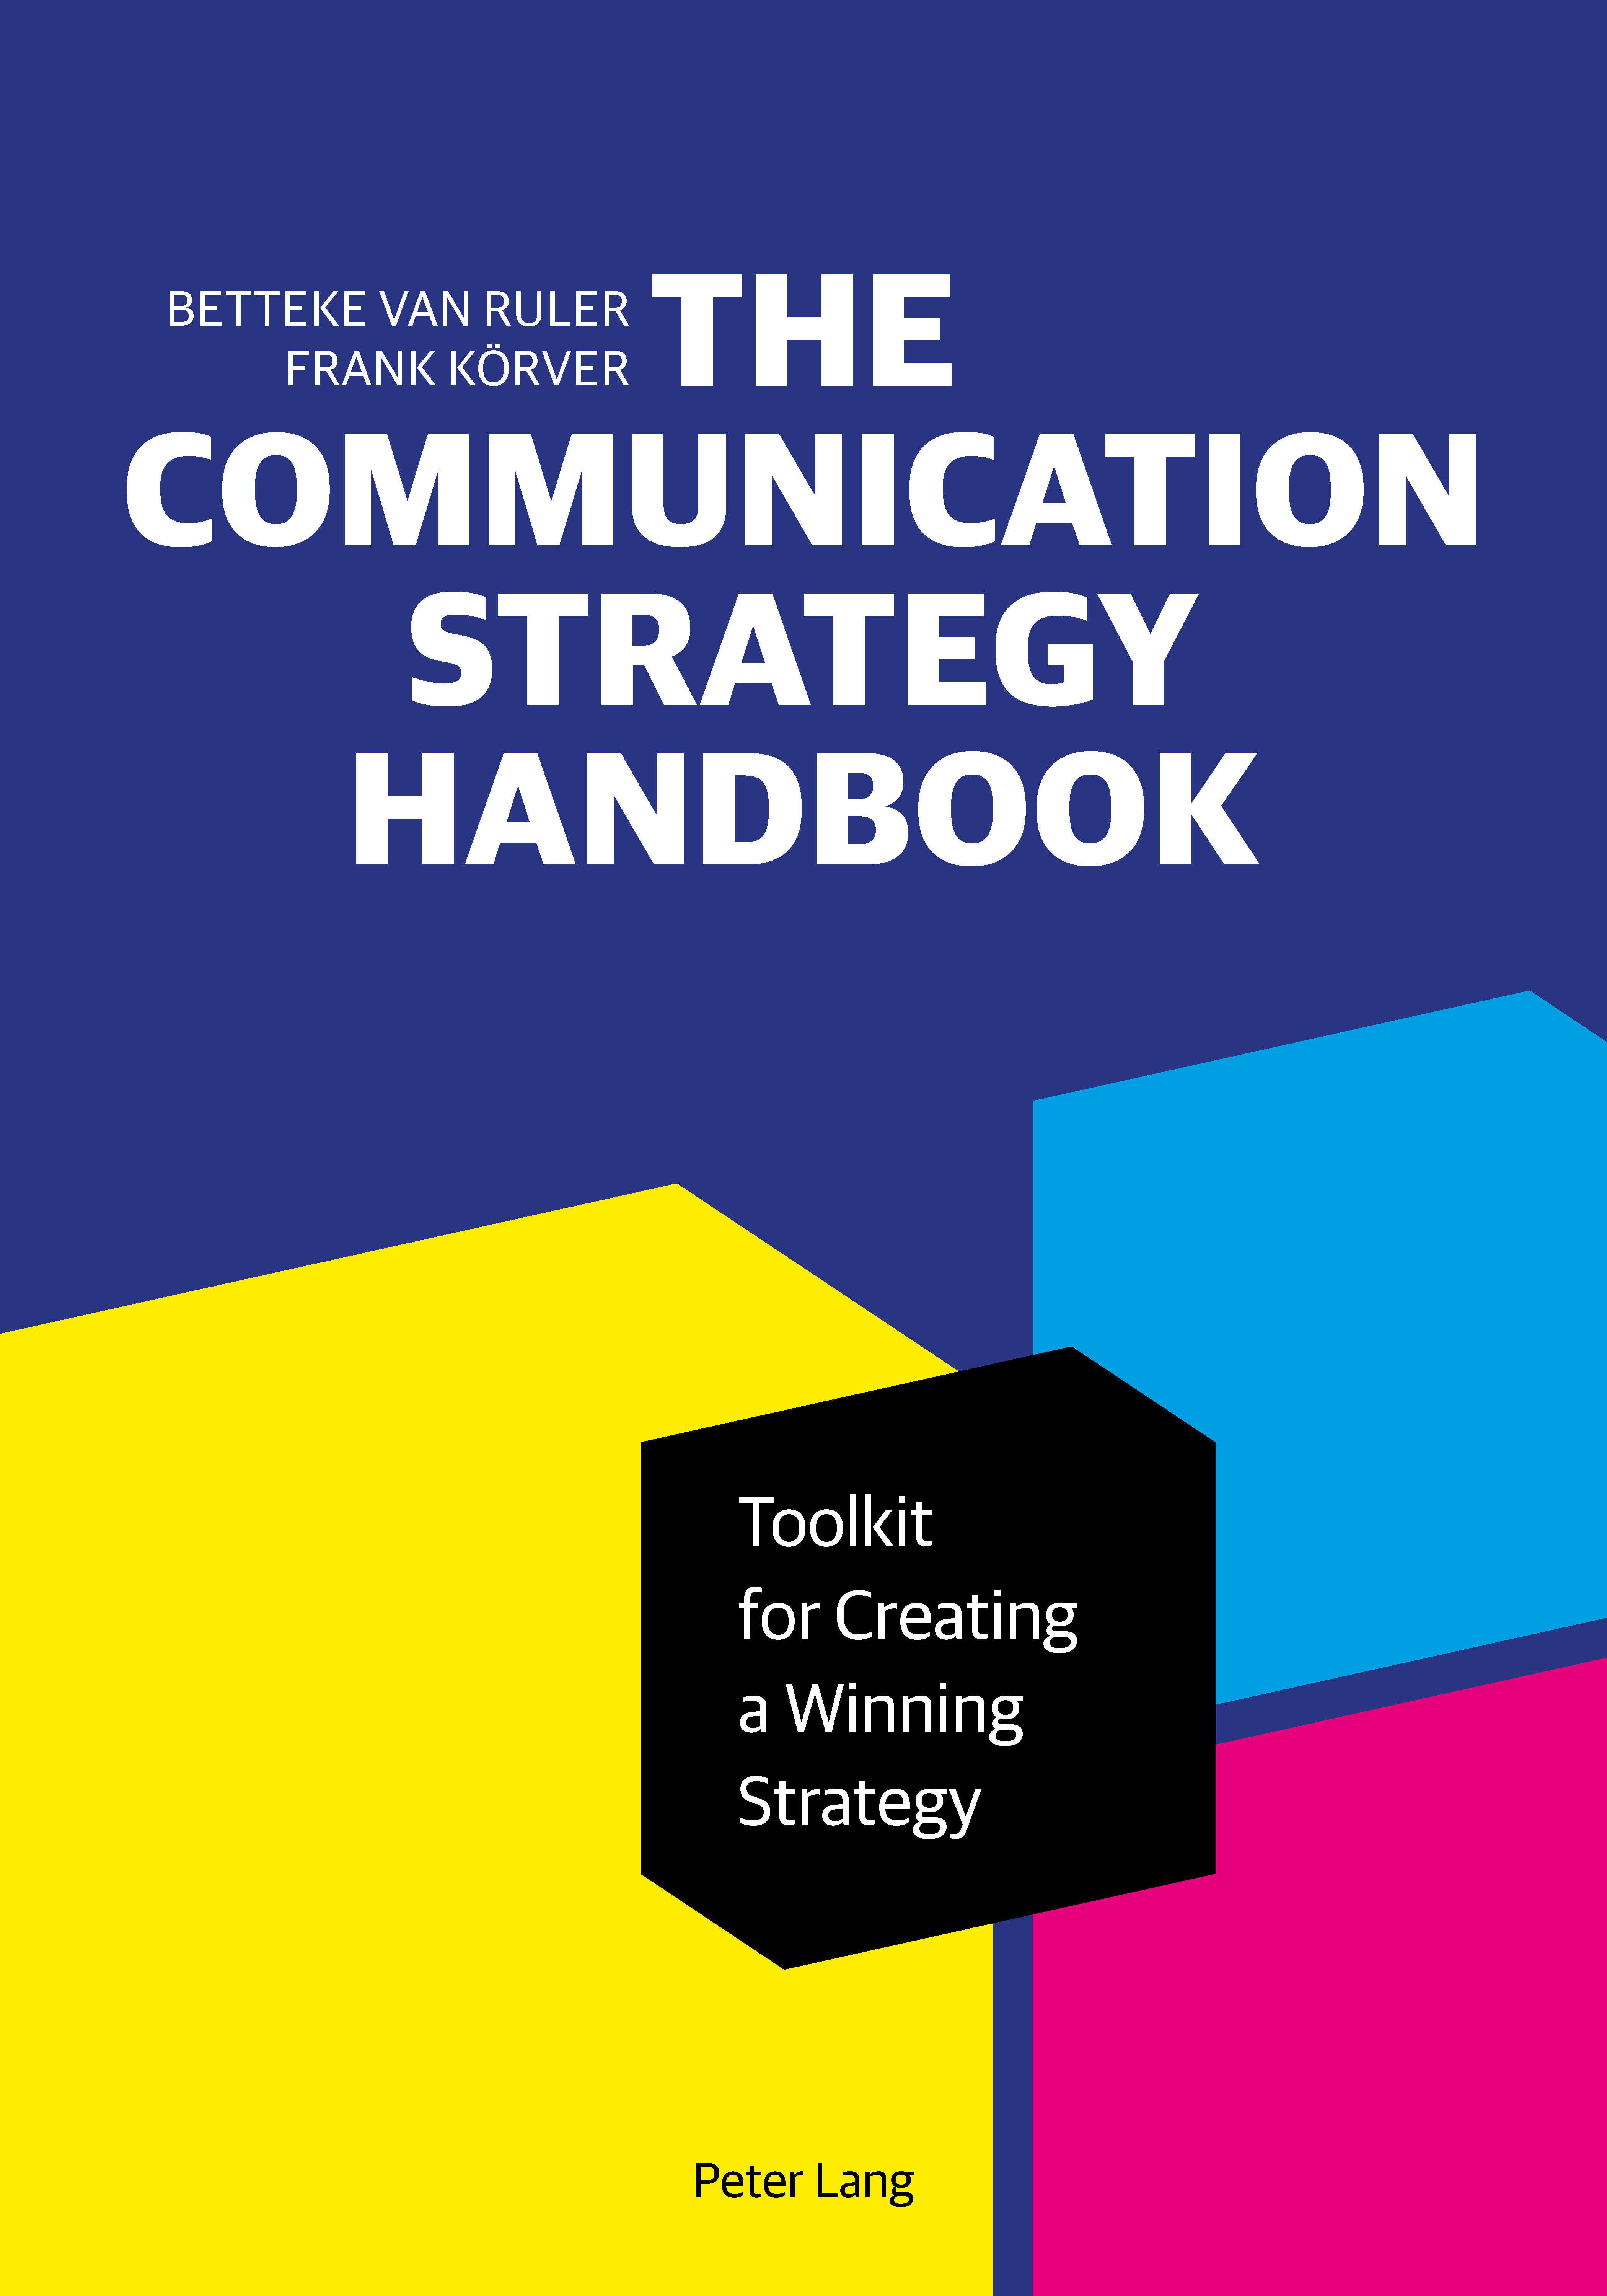 book review on communication